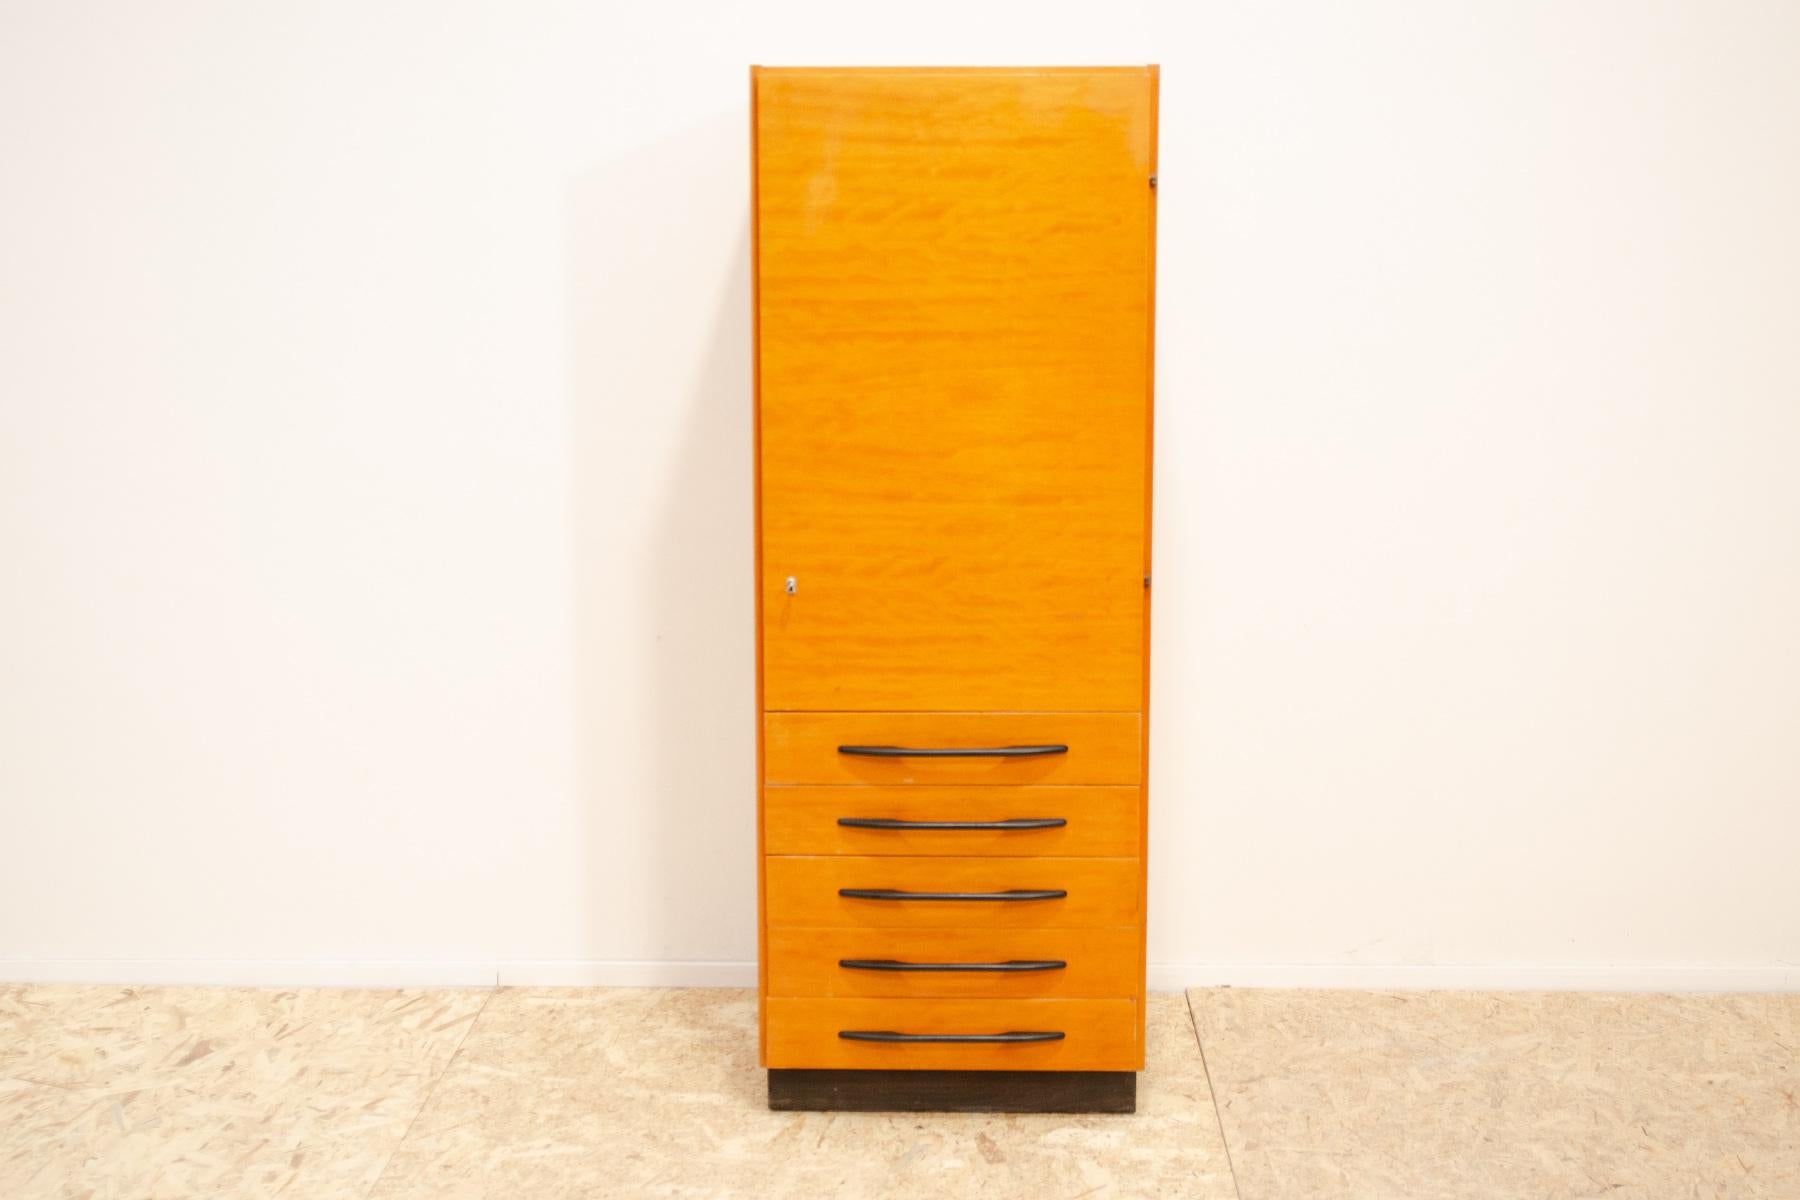 Multi-purpose cabinet or chest of drawers, designed by Mojmír Požár for ÚP Závody in the 1960s.  Made in a combination of ash, elm, maple wood.  It´s in good Vintage condition, shows signs of age and using.

Height:  162 cm

lenght:  60 cm

depth: